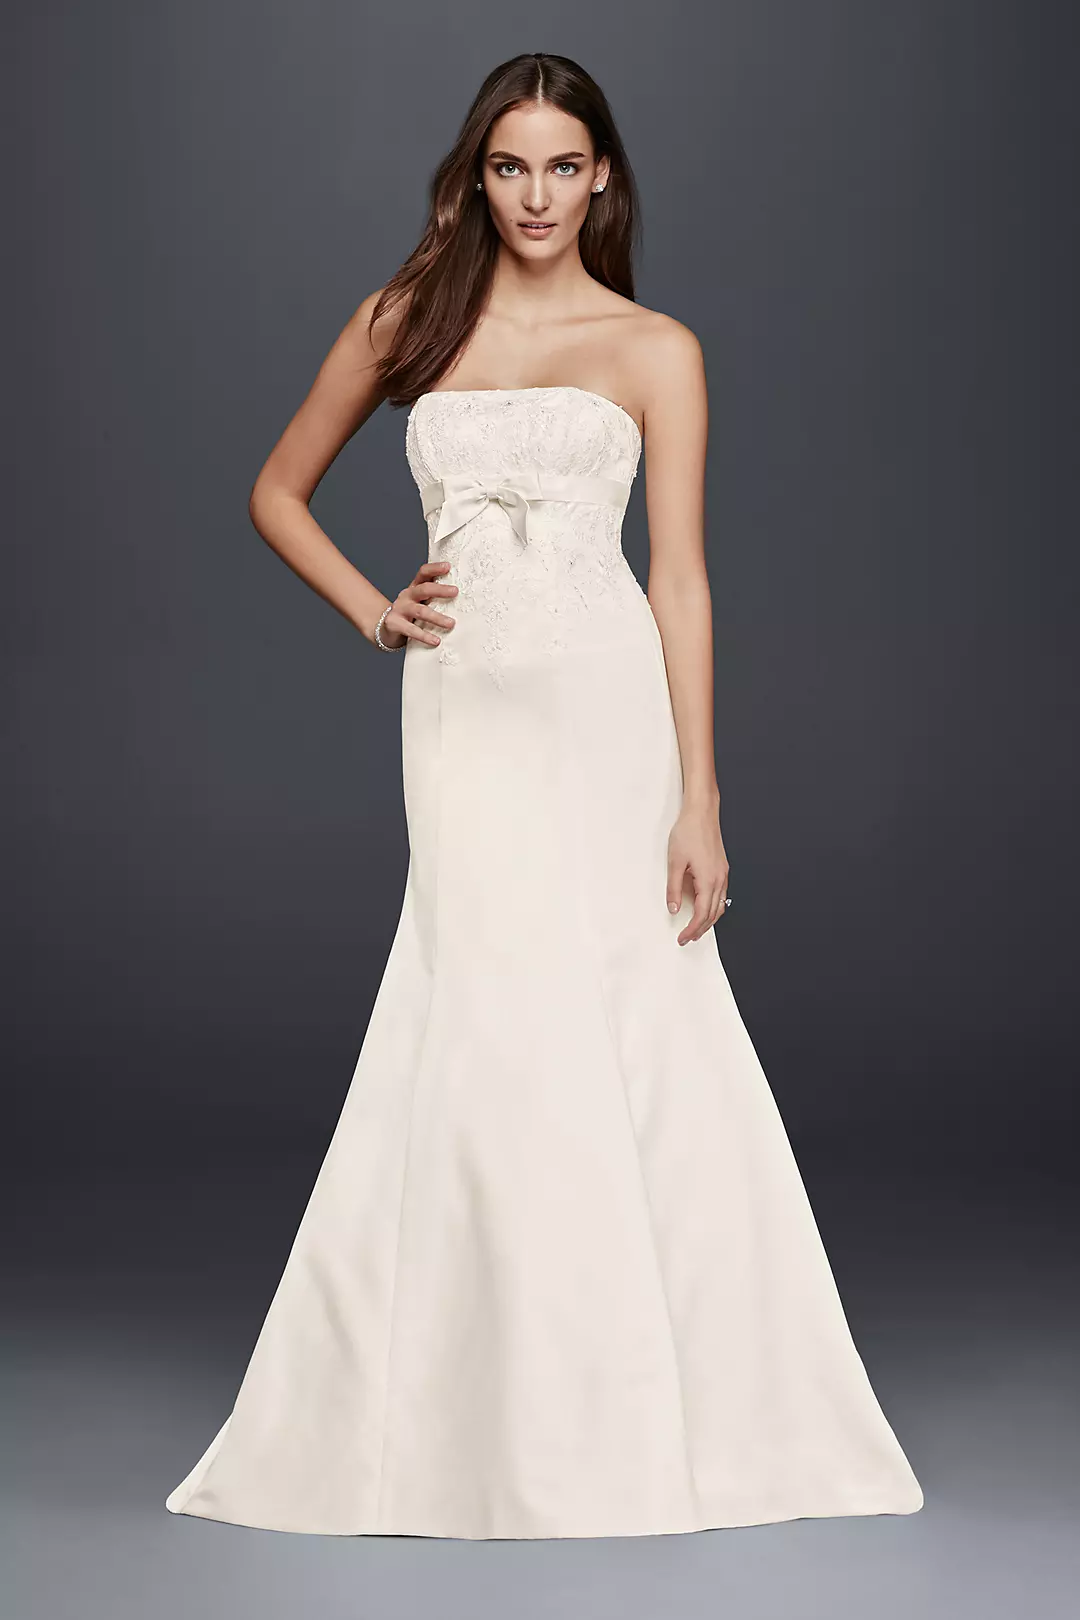 Strapless Mermaid Wedding Dress with Bow Detail Image